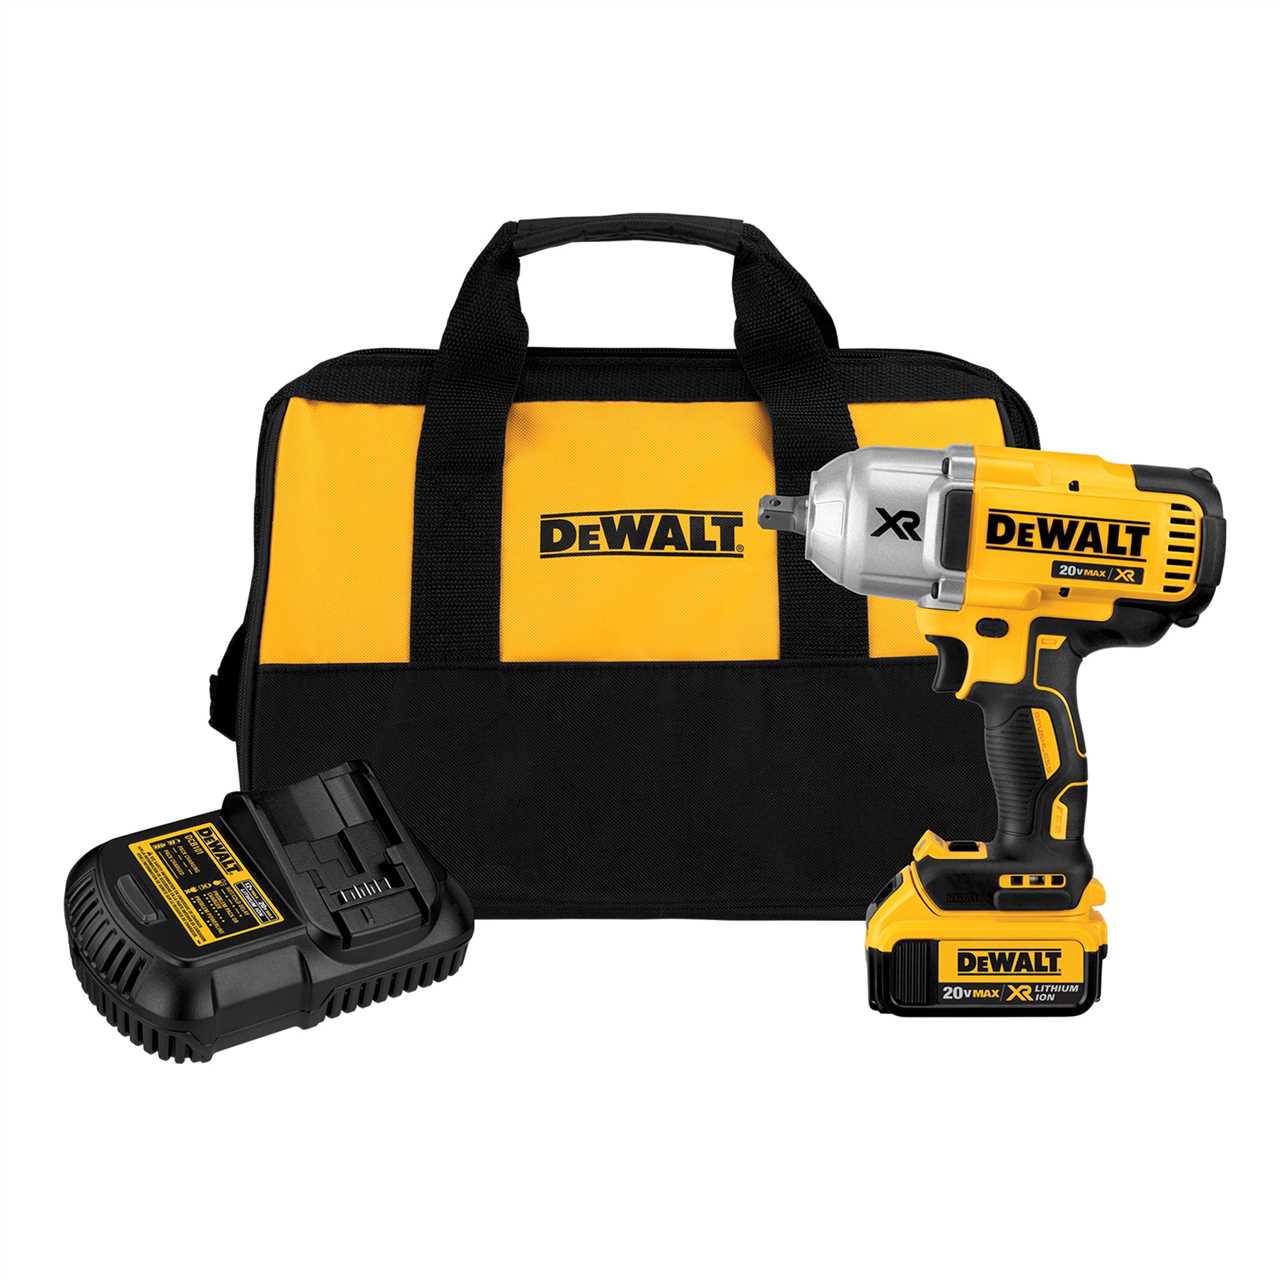 Factors to consider when buying a Dewalt Impact Wrench